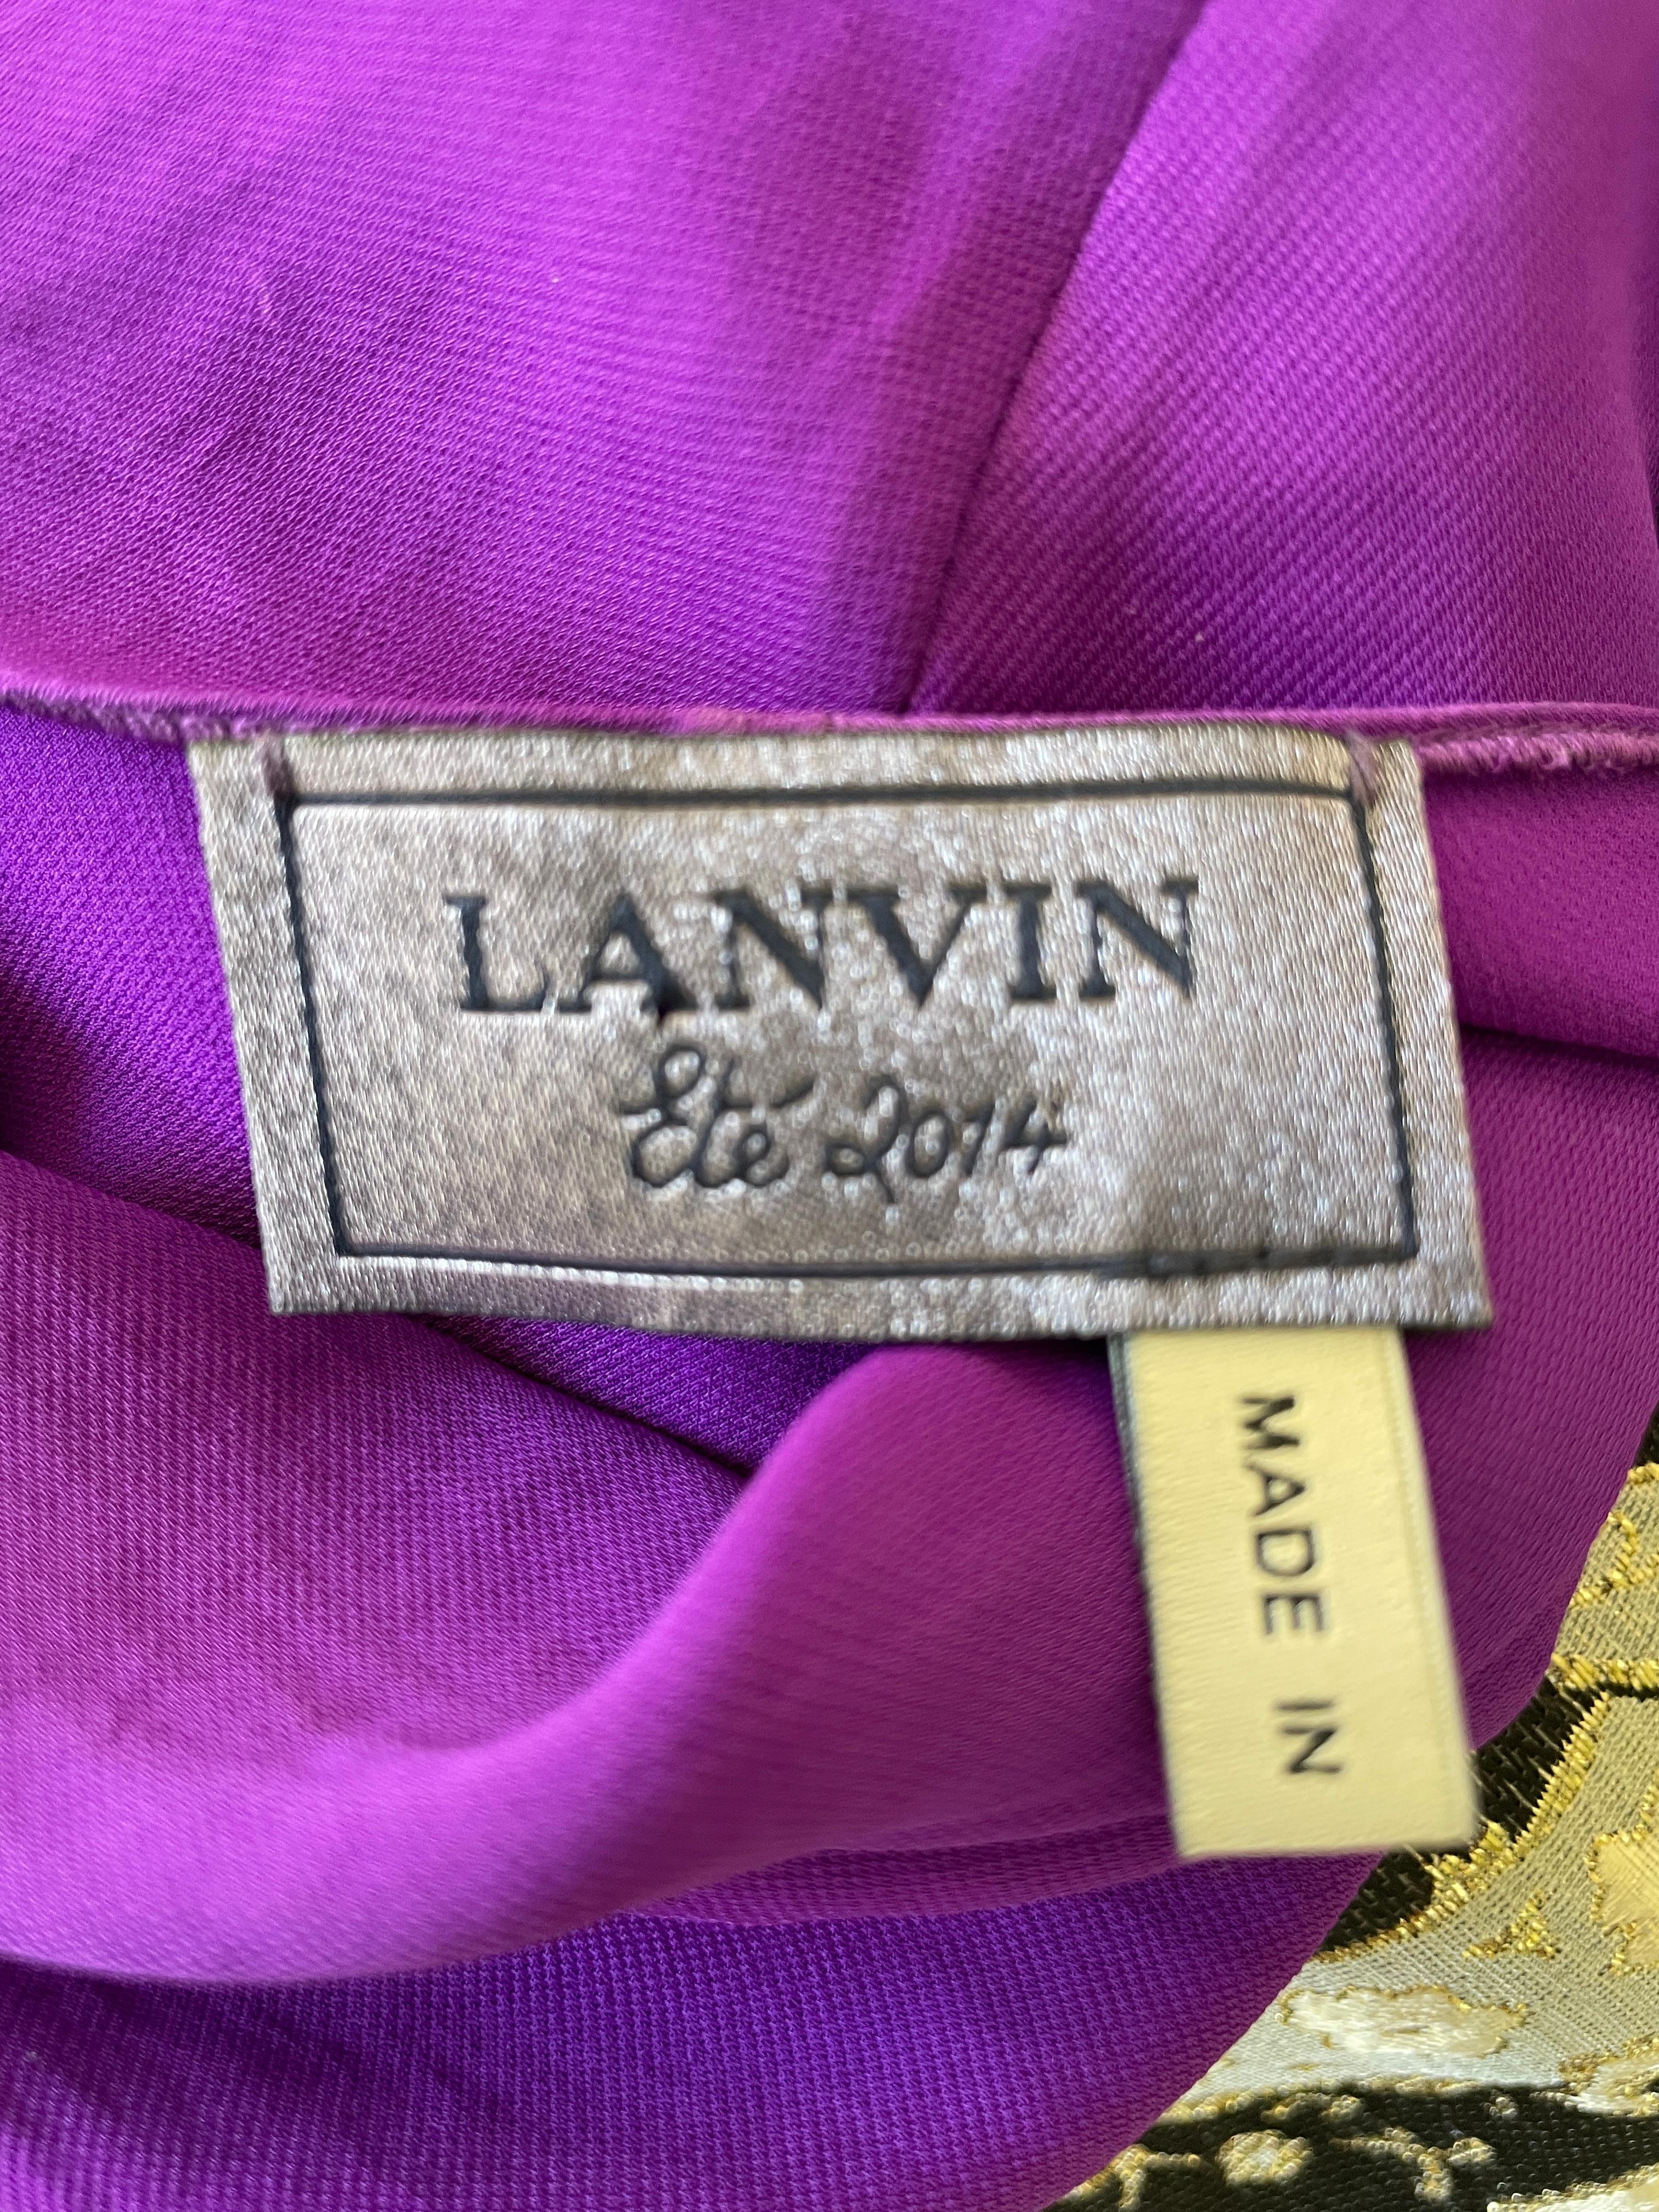  Lanvin by Alber Elbaz 2014 Plunging Purple Evening Dress with High Slit For Sale 3